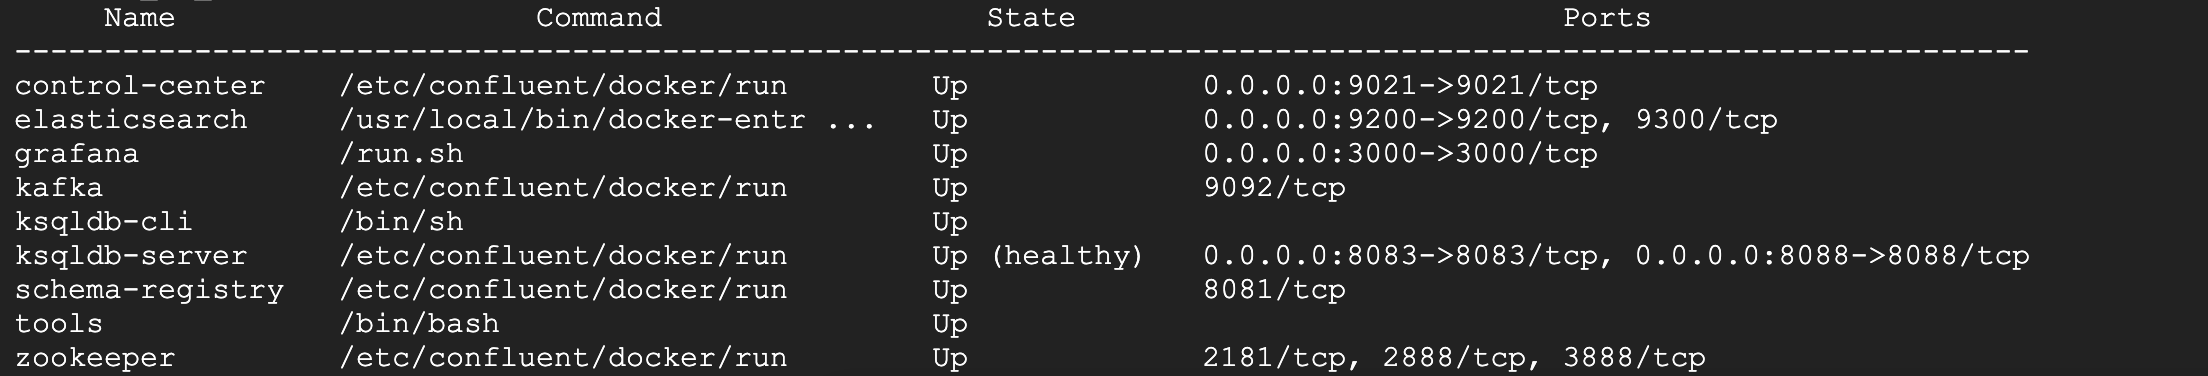 Output that displays 9 files under four column headings: Name, Command, State, and Ports